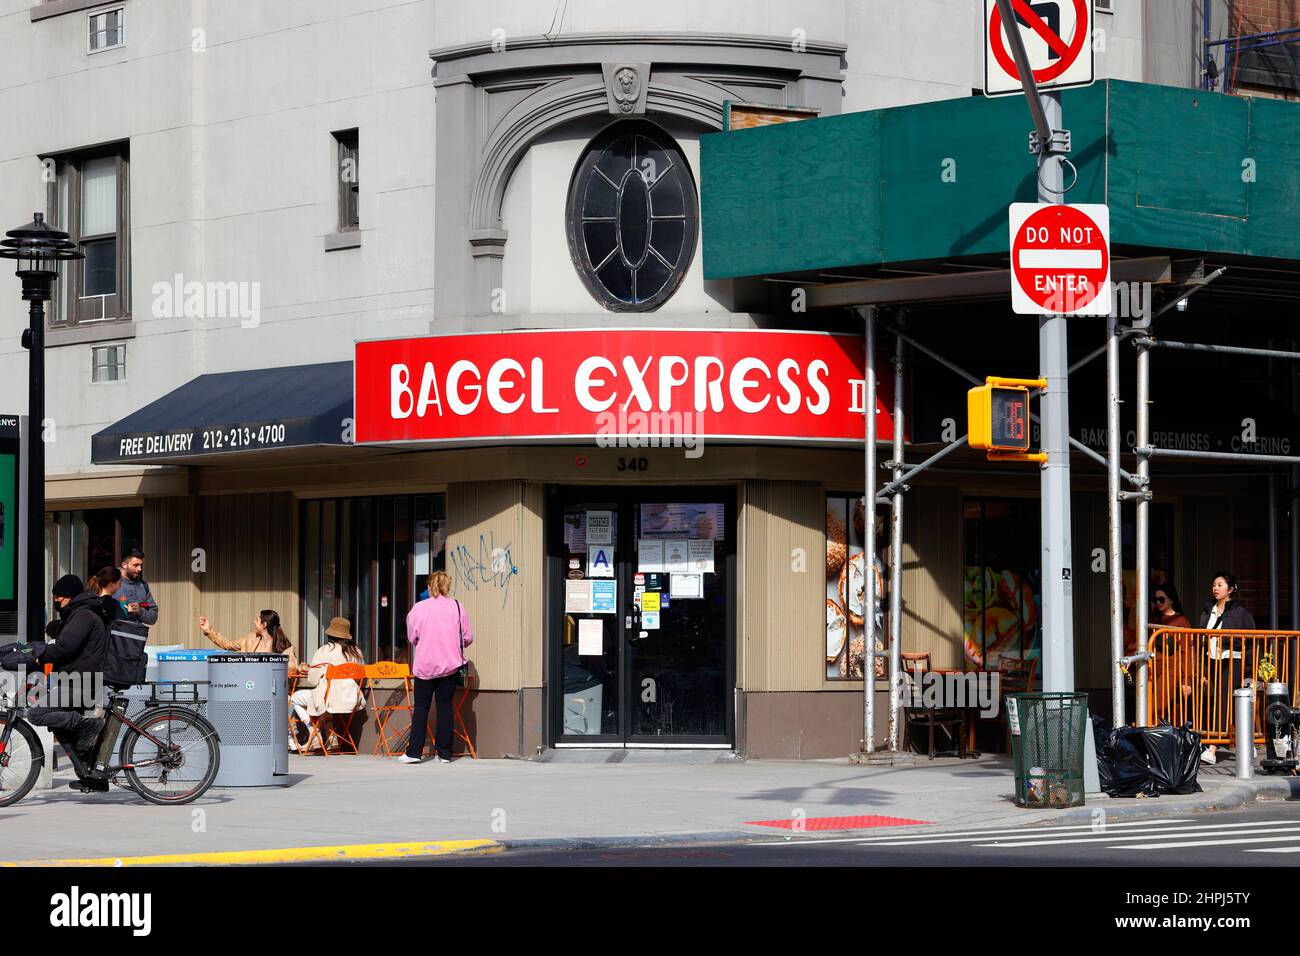 Bagel Express III, 340 3rd Ave, New York, NYC storefront photo of a bagel shop in the Kips Bay neighborhood of Manhattan. Stock Photo